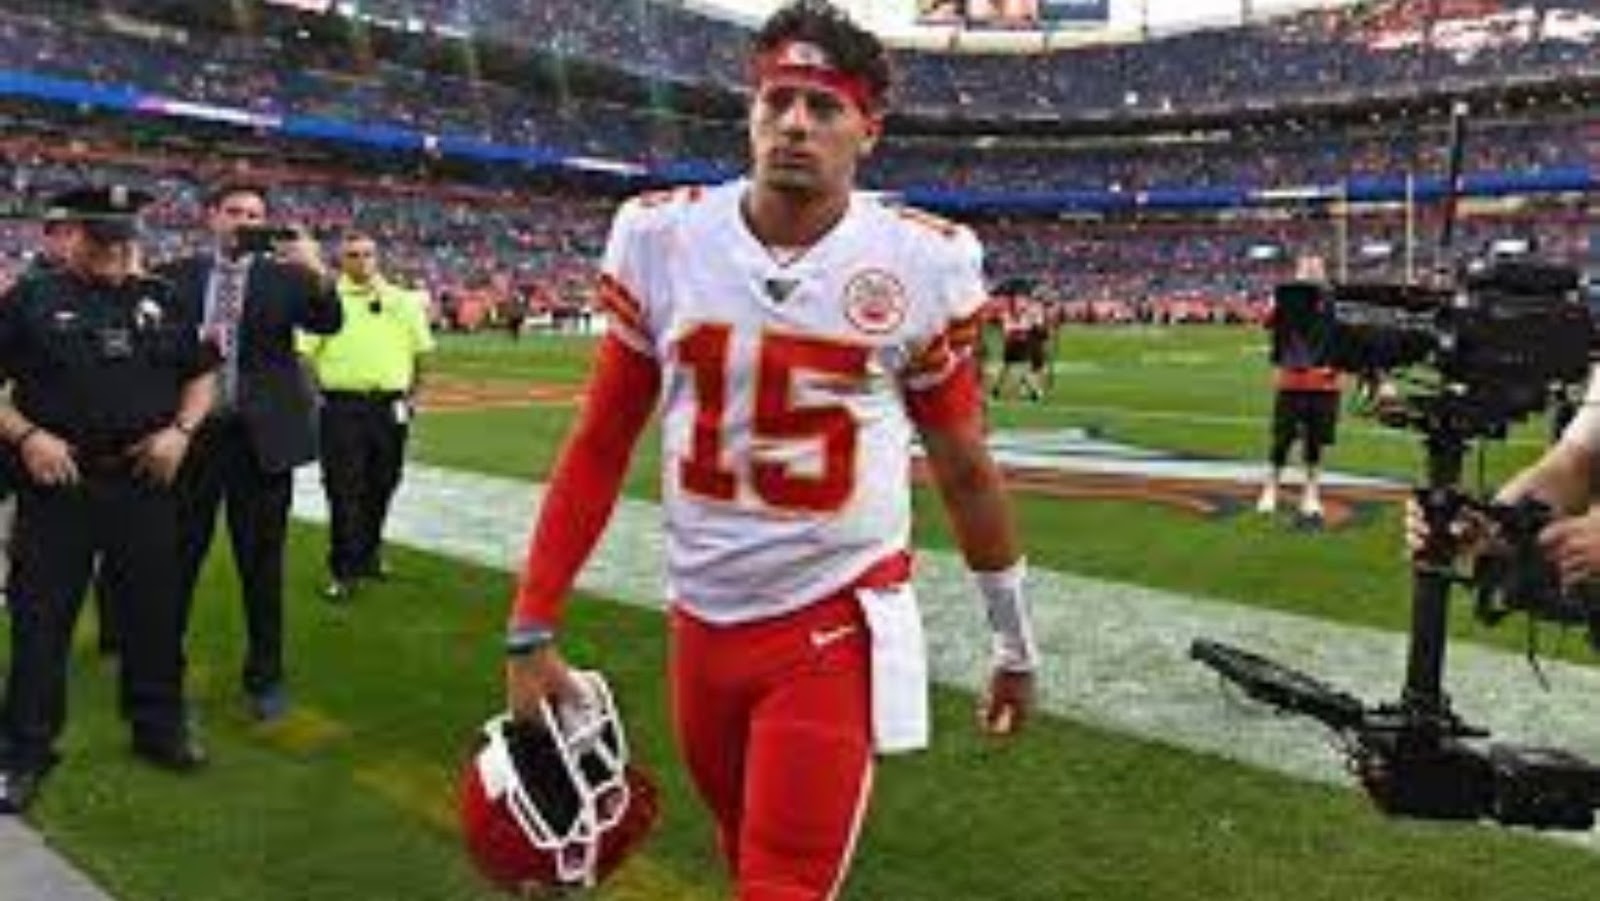 Mahomes breaks record with fastest football throw